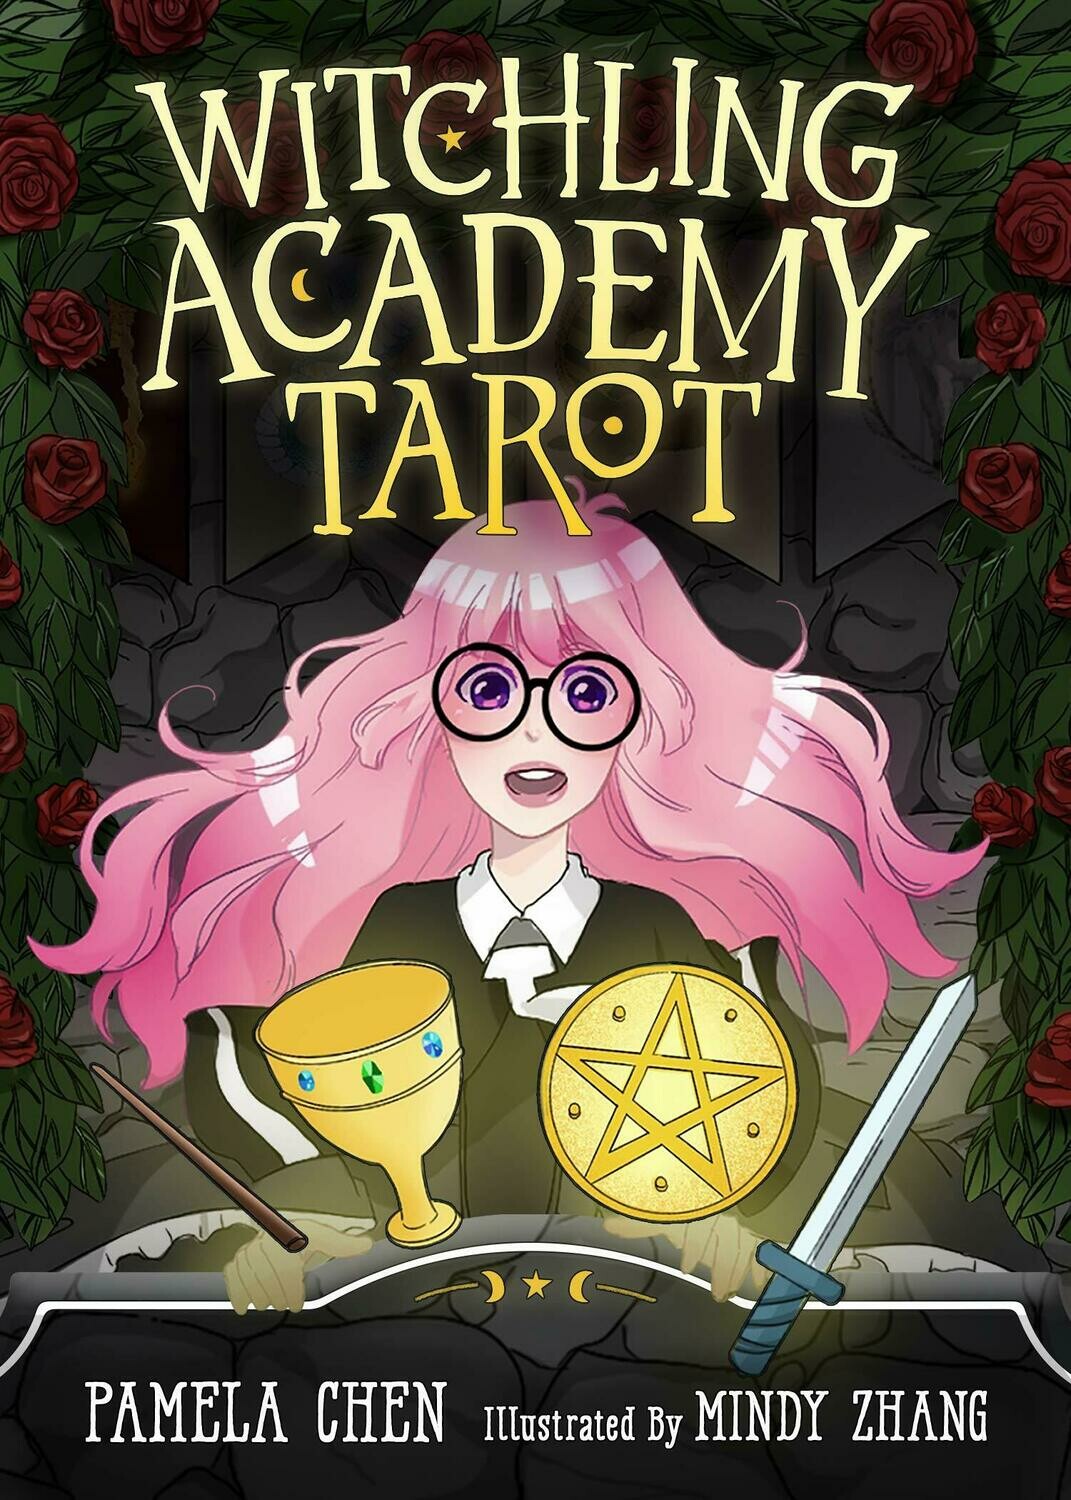 Witchling Academy Tarot by Pamela Chen and Mindy Zhang